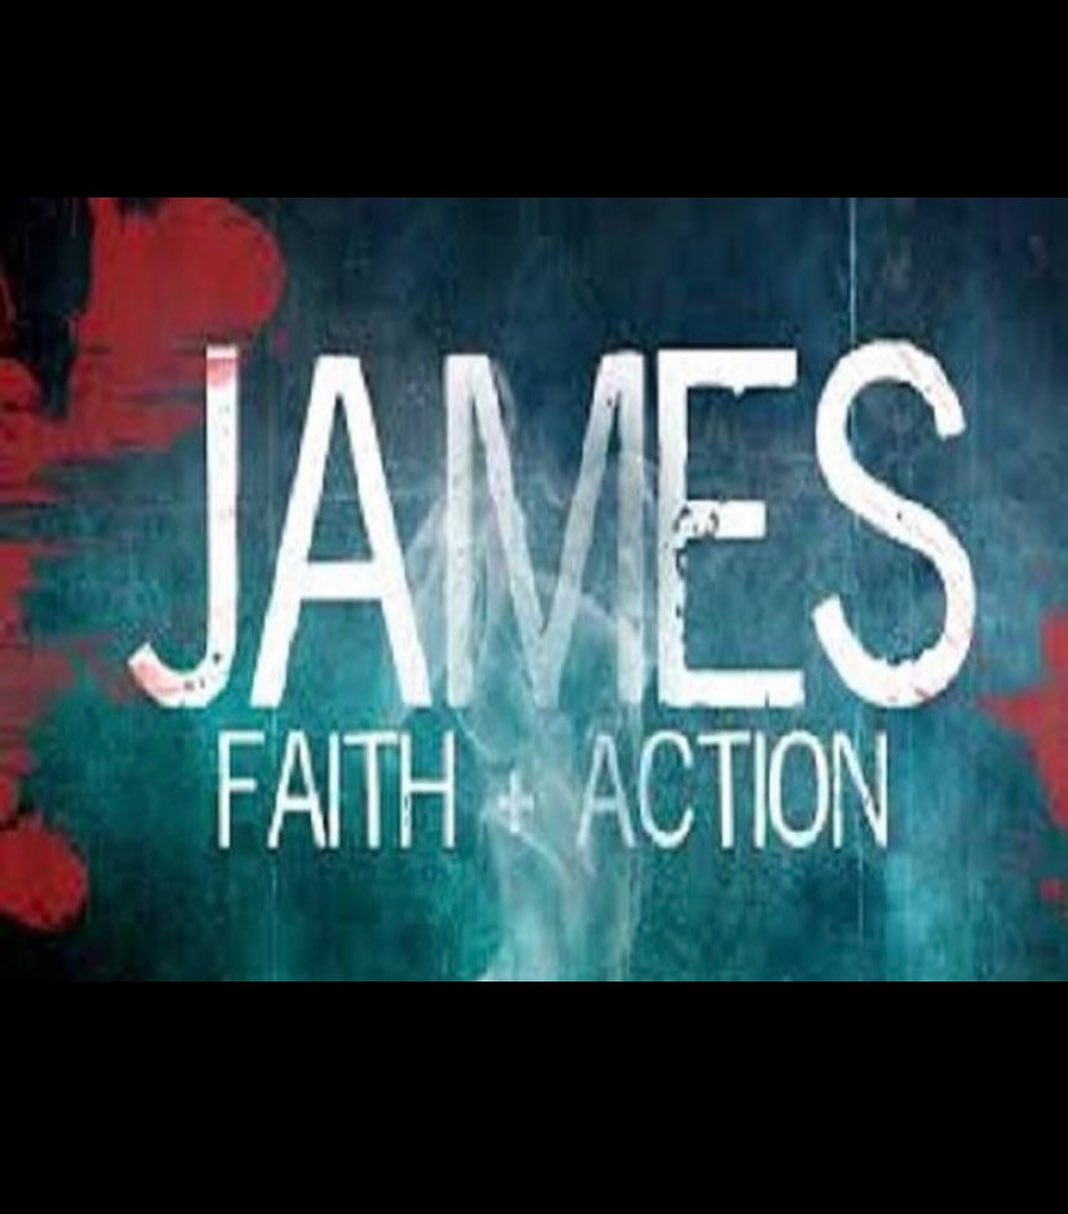 Last Sunday, we began a dialogue about the current state of the American church and how the book of James is SO TIMELY as a call to action for the body of Christ! Actions speak louder than words. As history has proved, the consequence of inaction can lead to death… The German church in the 1930’s was quite silent in the face of evil. We know what followed. Why has the American church fallen not only silent in the face of evil, but in some cases, condoning it? Join us Sunday 10AM @fallbrookvineyardchurch as we CONTINUE the dialogue.Is the church calling out sin? Is the church defining sin as the Bible does? Is the church acknowledging and taking a stand against satan? James calls it like it is in 4:17, “Therefore, to him who knows to do good and does not do it, to him it is sin.”James tells us in 2:26 ”For as the body without the spirit is dead, so faith without works is dead also.” Church, what are we going to do for Christ? See you Sunday! Bring your bibles and chairs and friends! #epistleofjames#faithinaction#faithwithoutworksisdead#lettertotheamericanchurch#thebible#prayer #lifeabundant#community #support #love#familyofgod #outdoorchurch #organicchurch #outlawchurch #dogfriendlychurch#dogchurch#fallbrookvineyardchurch#thevineyard1924